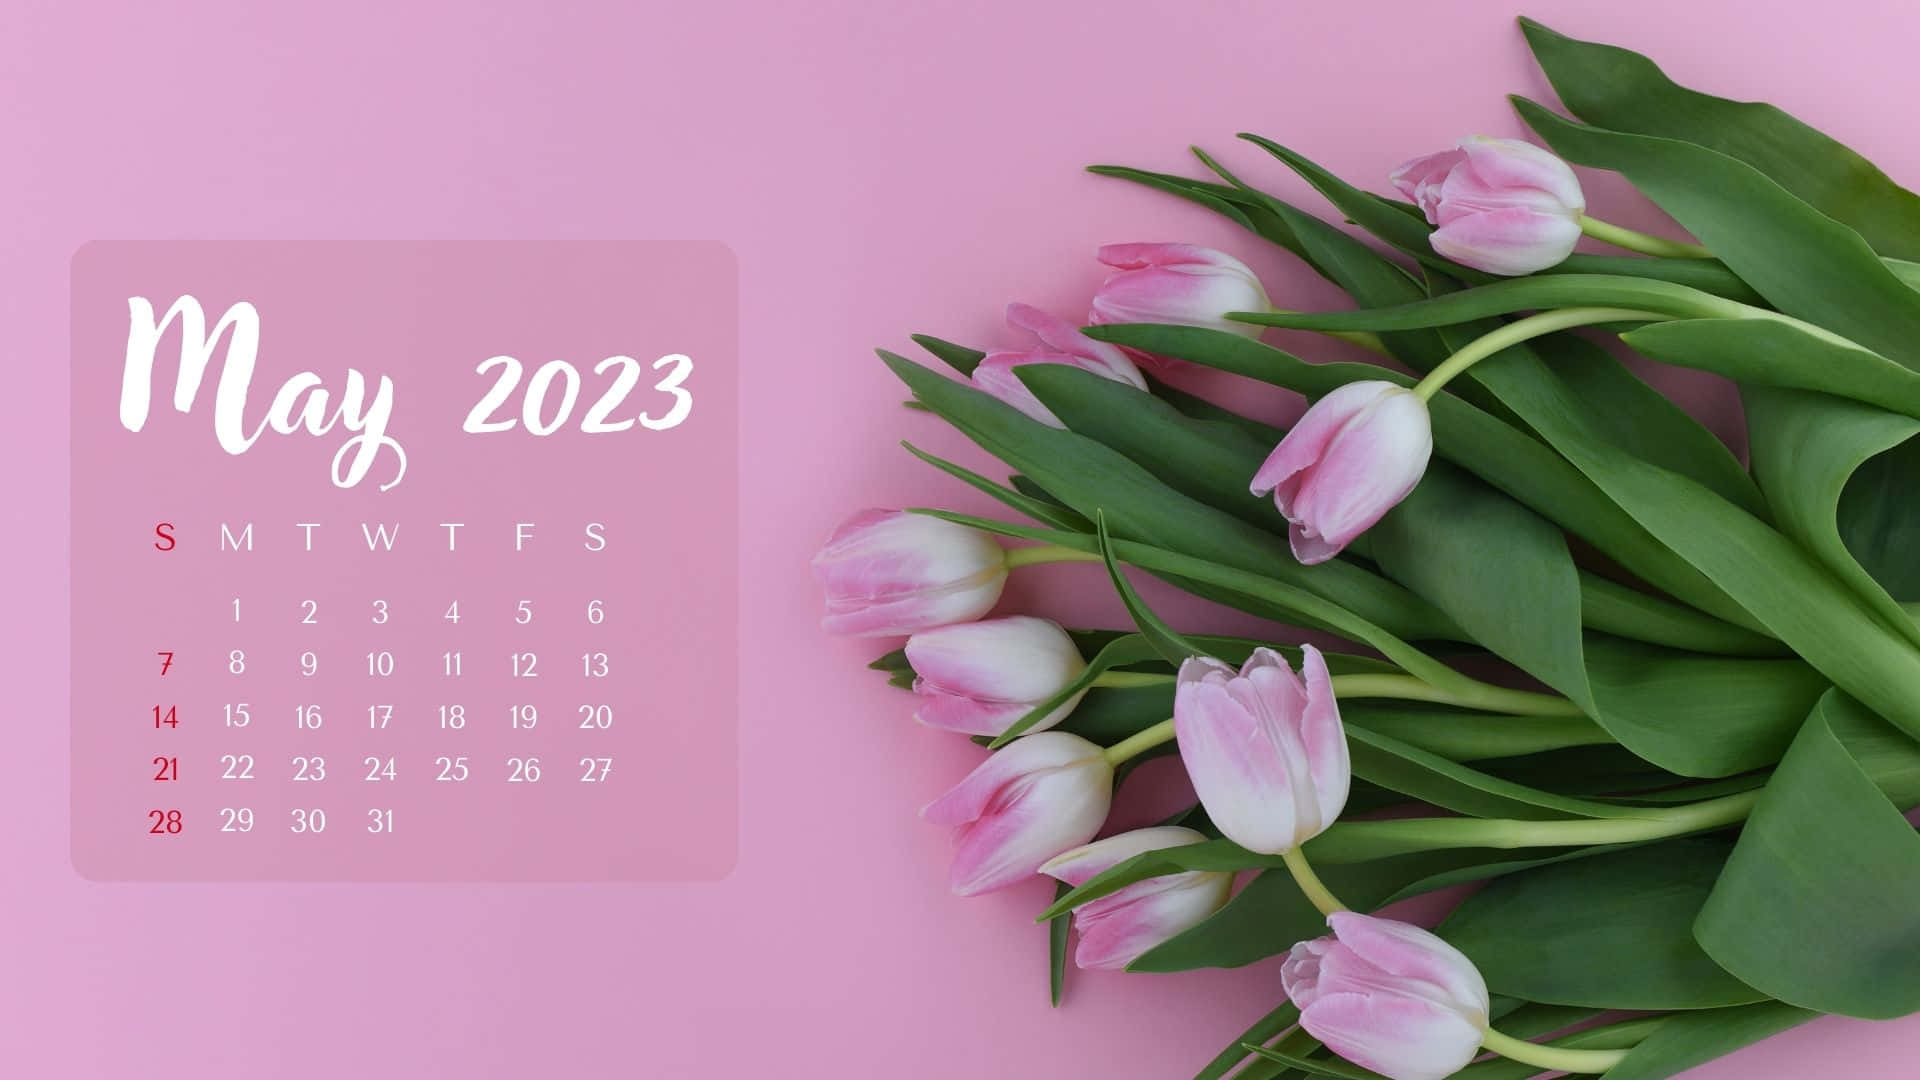 A Pink Calendar With Tulips On It Wallpaper